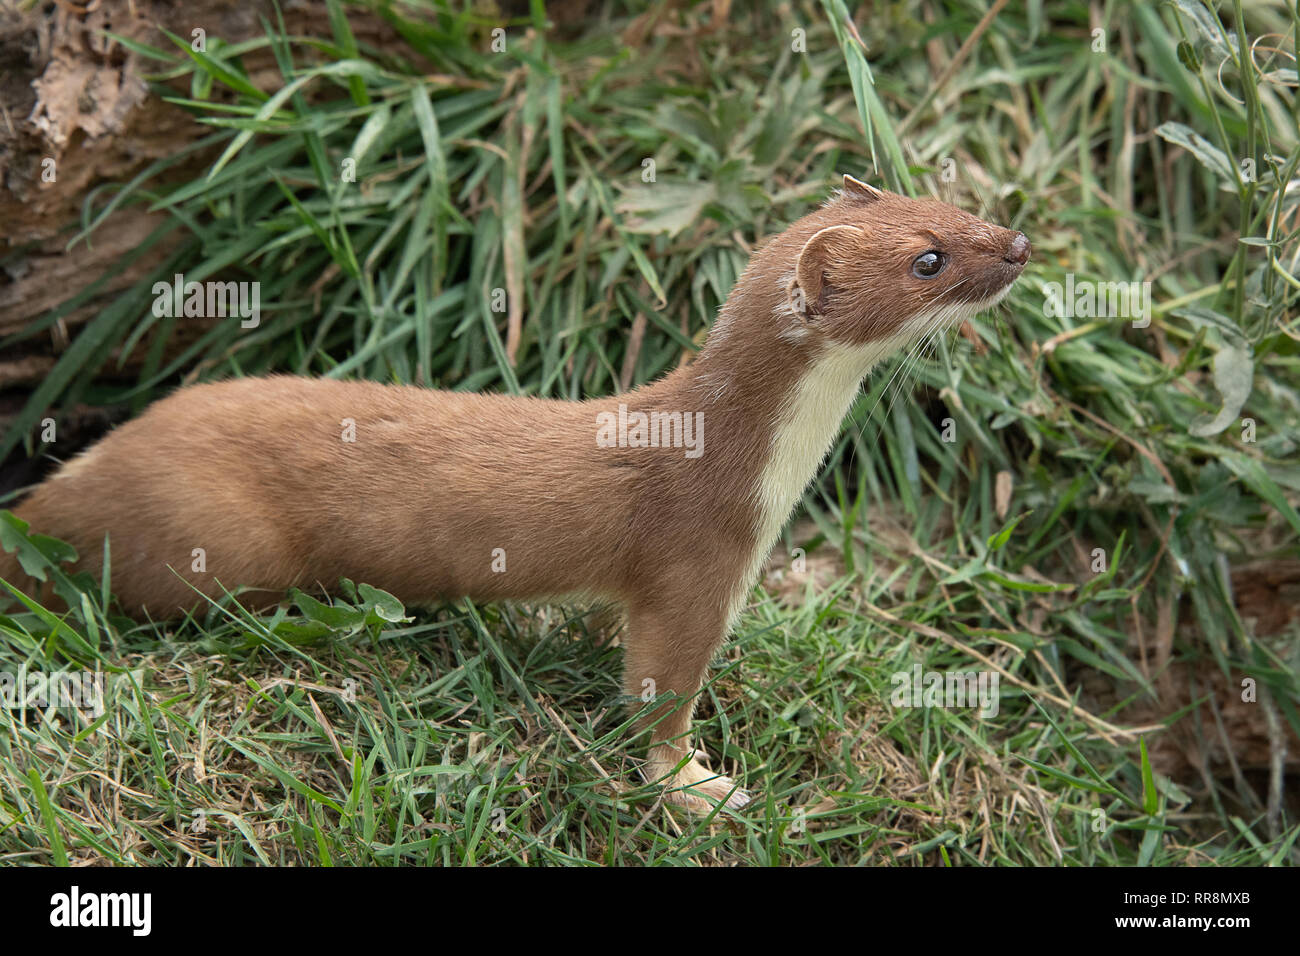 Side view full length portrait of a stoat mussel ermine emerging from a grass bank and looking alert to right Stock Photo